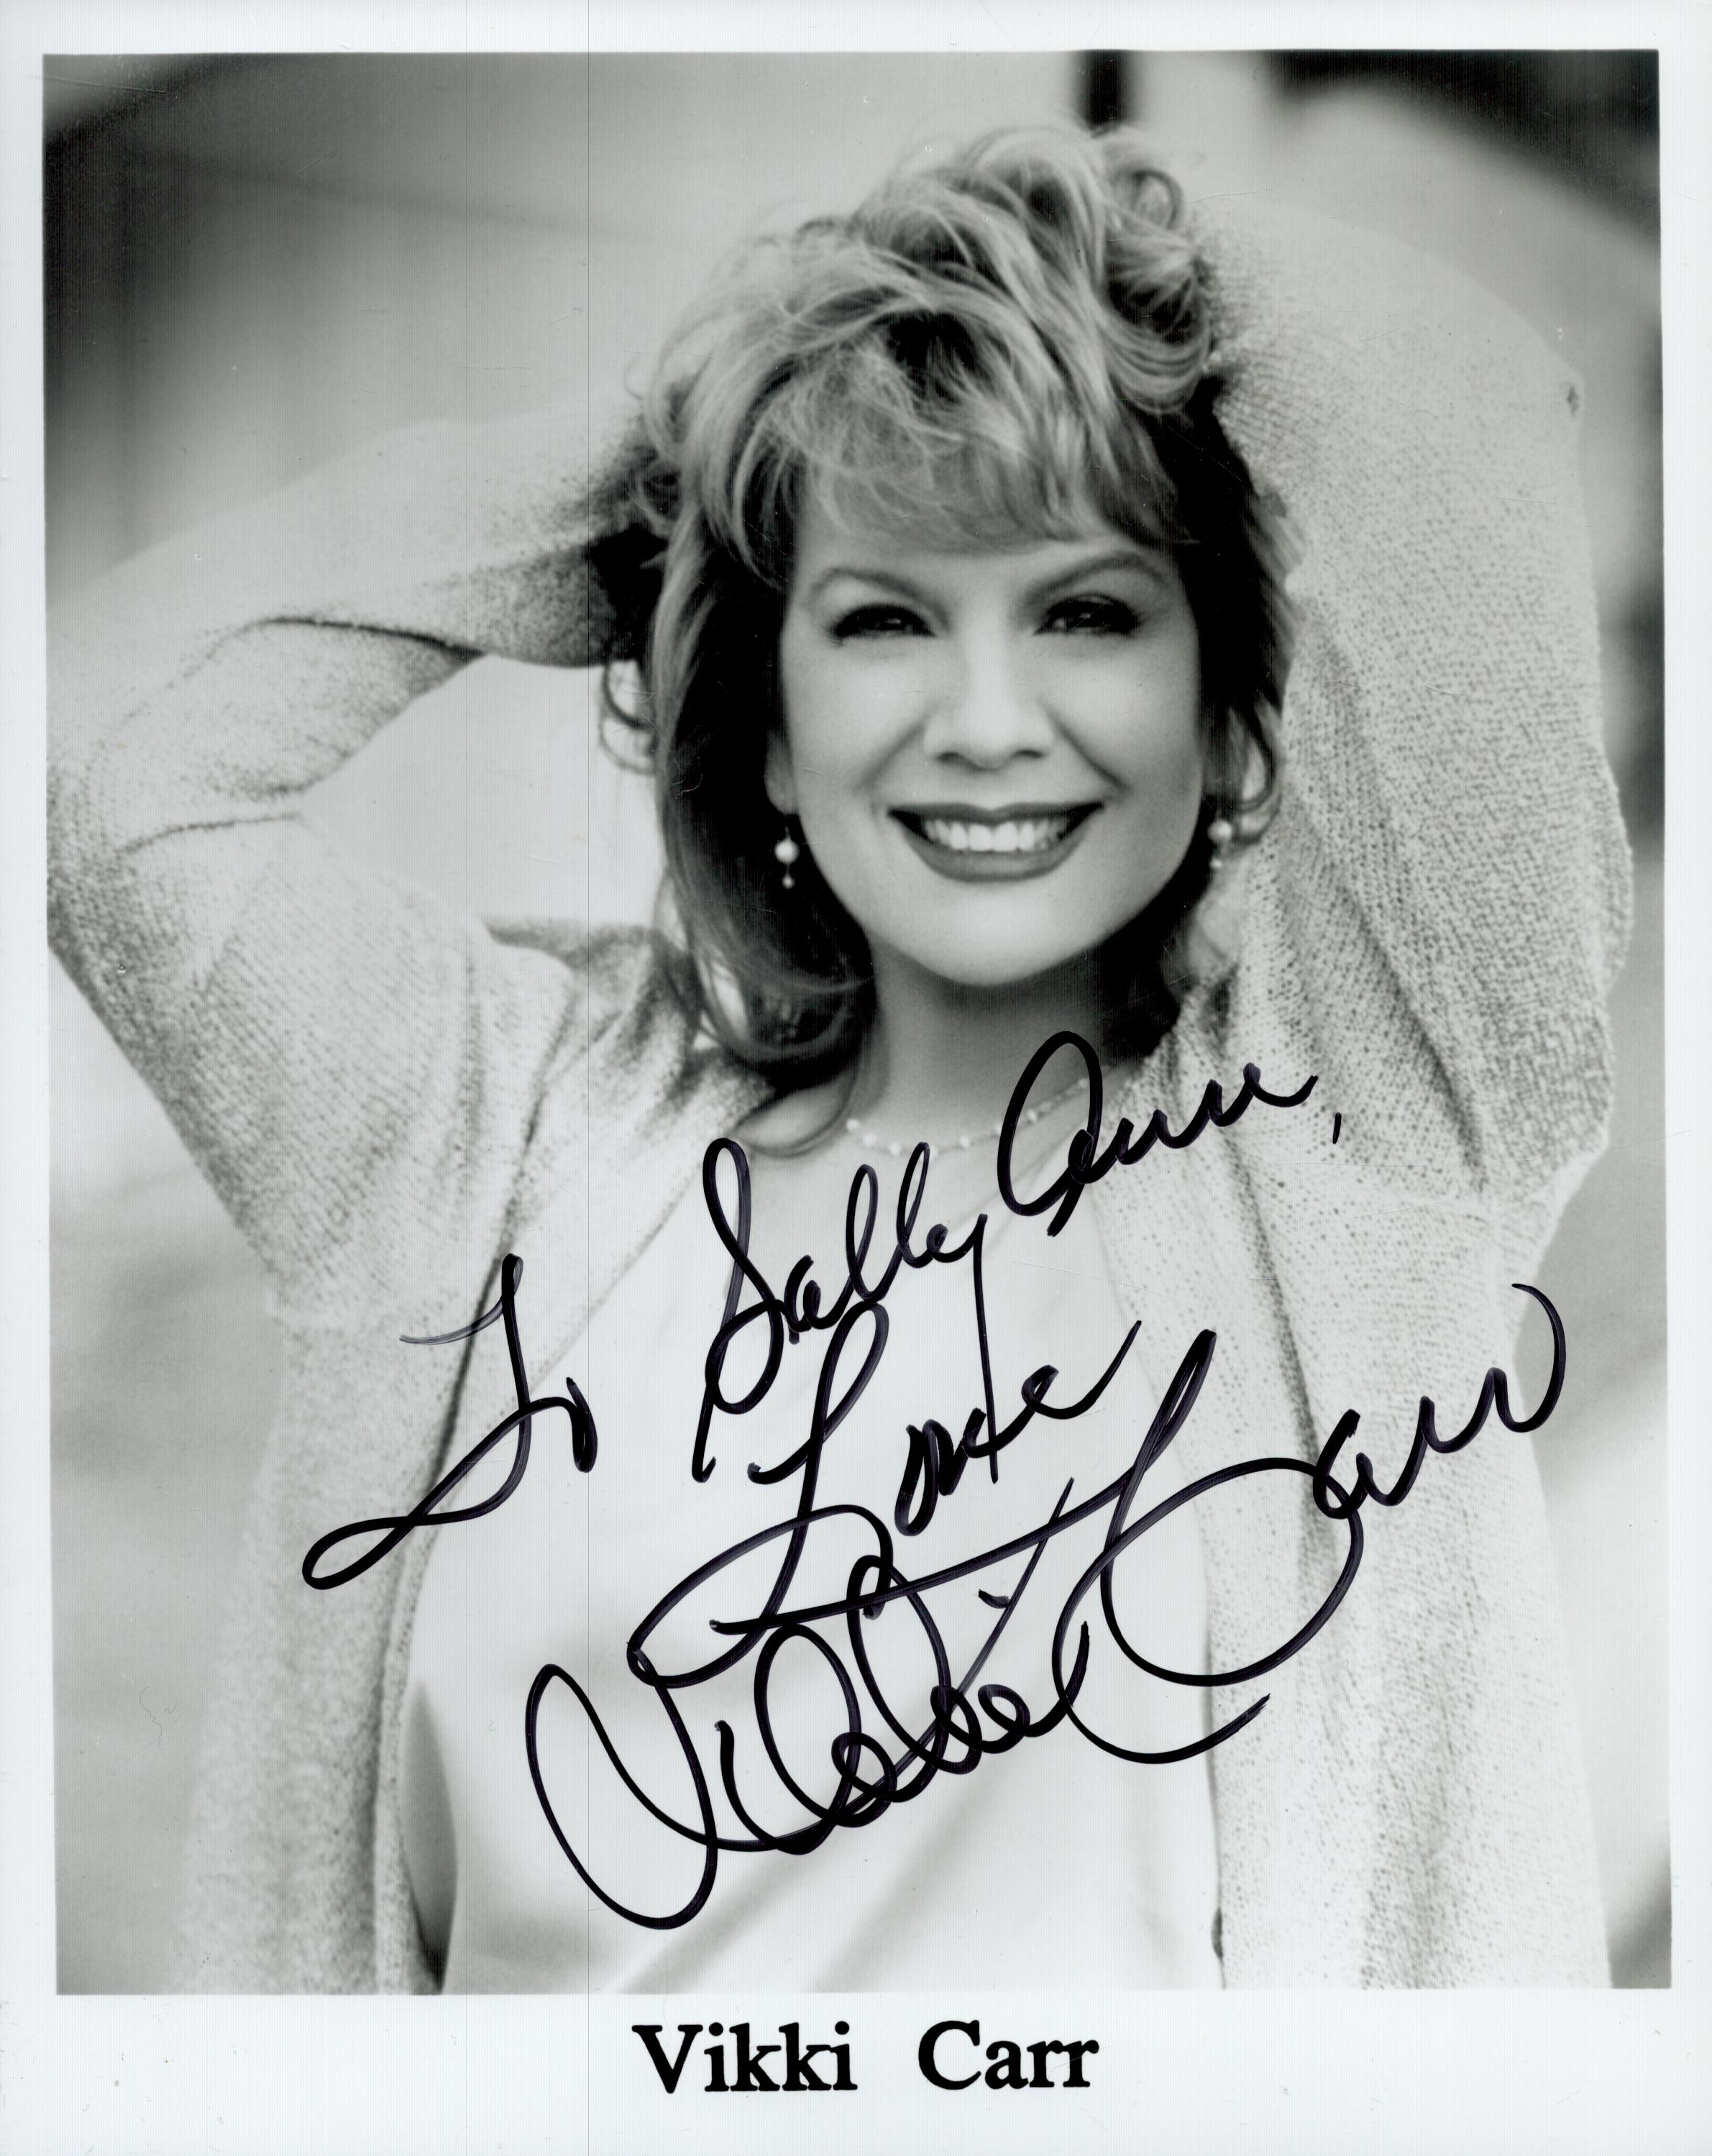 Vikki Carr signed 10x8 inch black and white promo photo. Dedicated. Good condition Est.